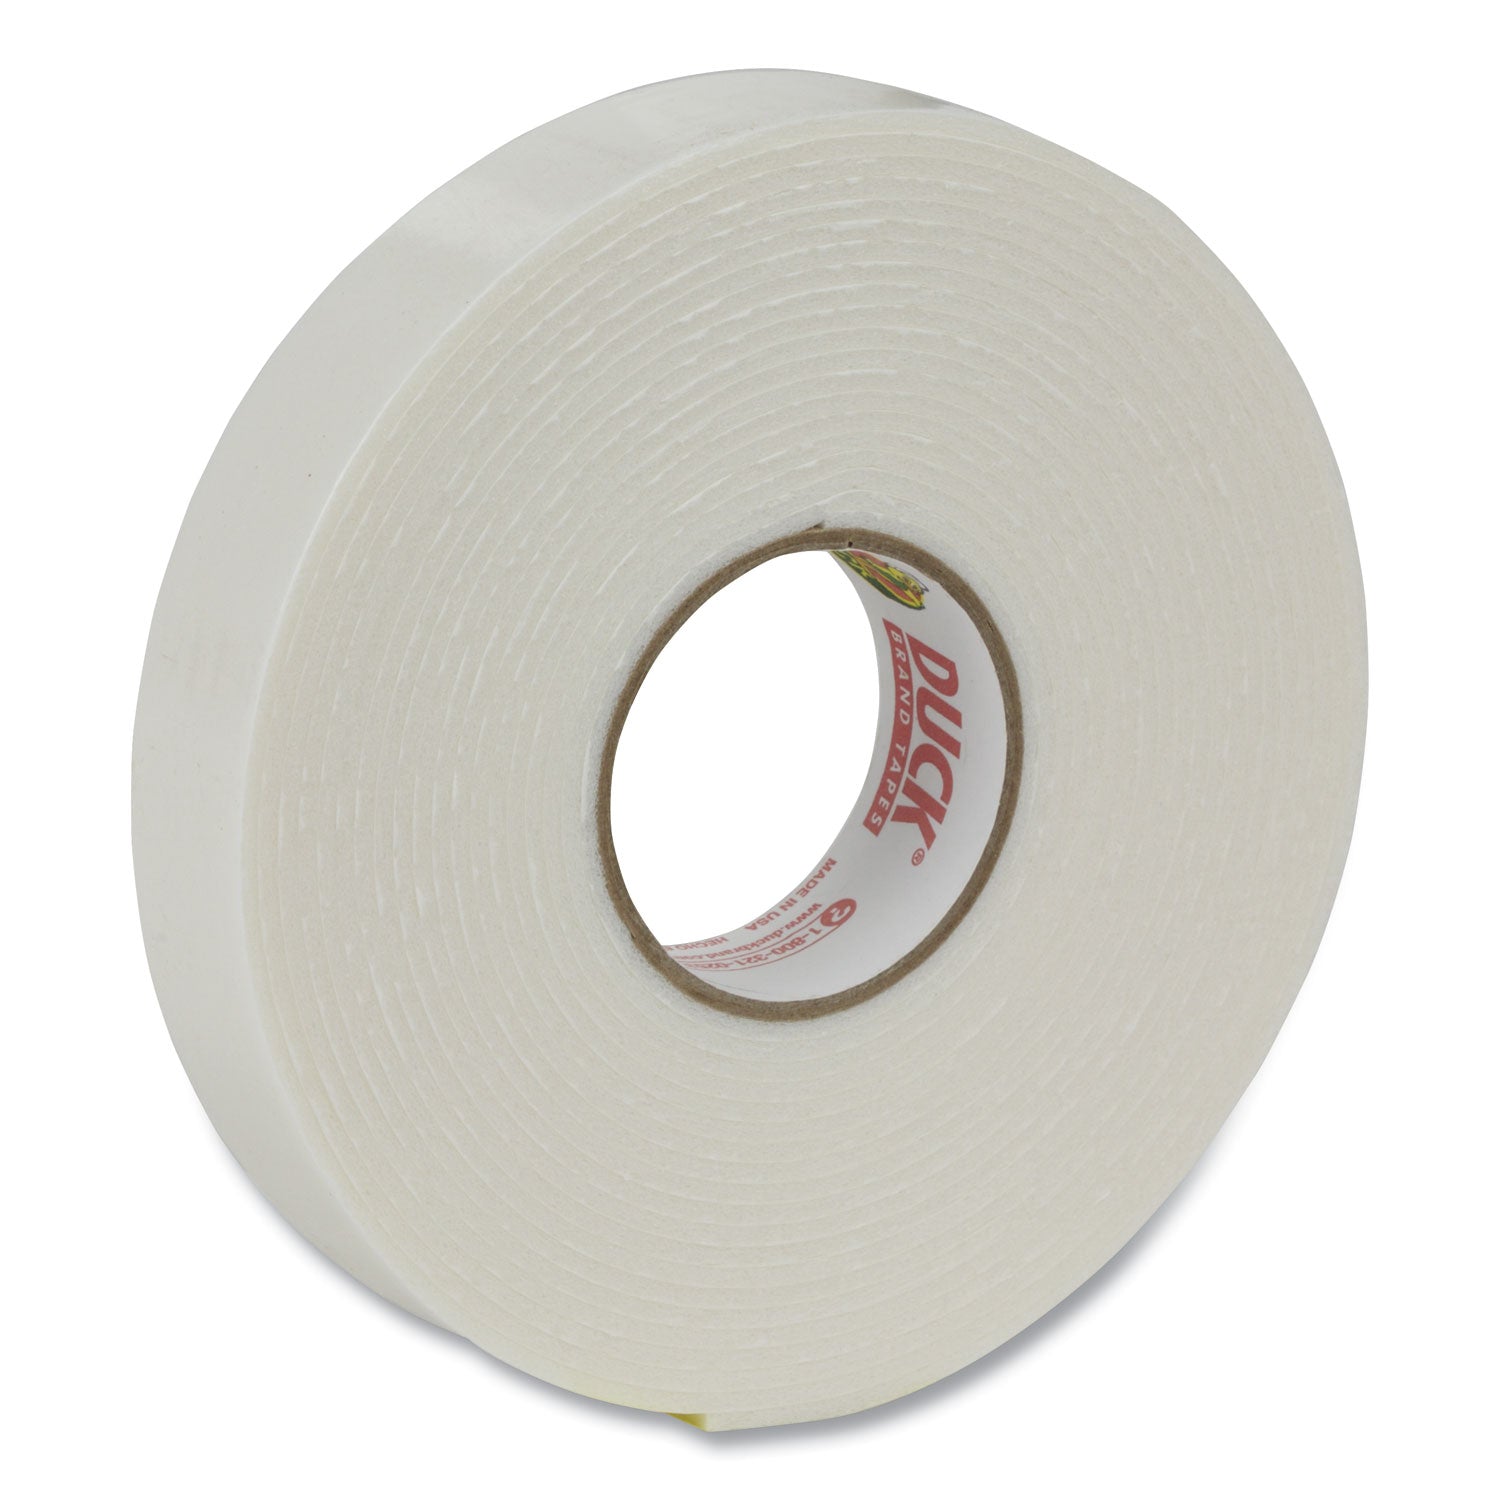 Double-Stick Foam Mounting Tape, Permanent, Holds Up to 2 lbs, 0.75" x 15 ft, White - 